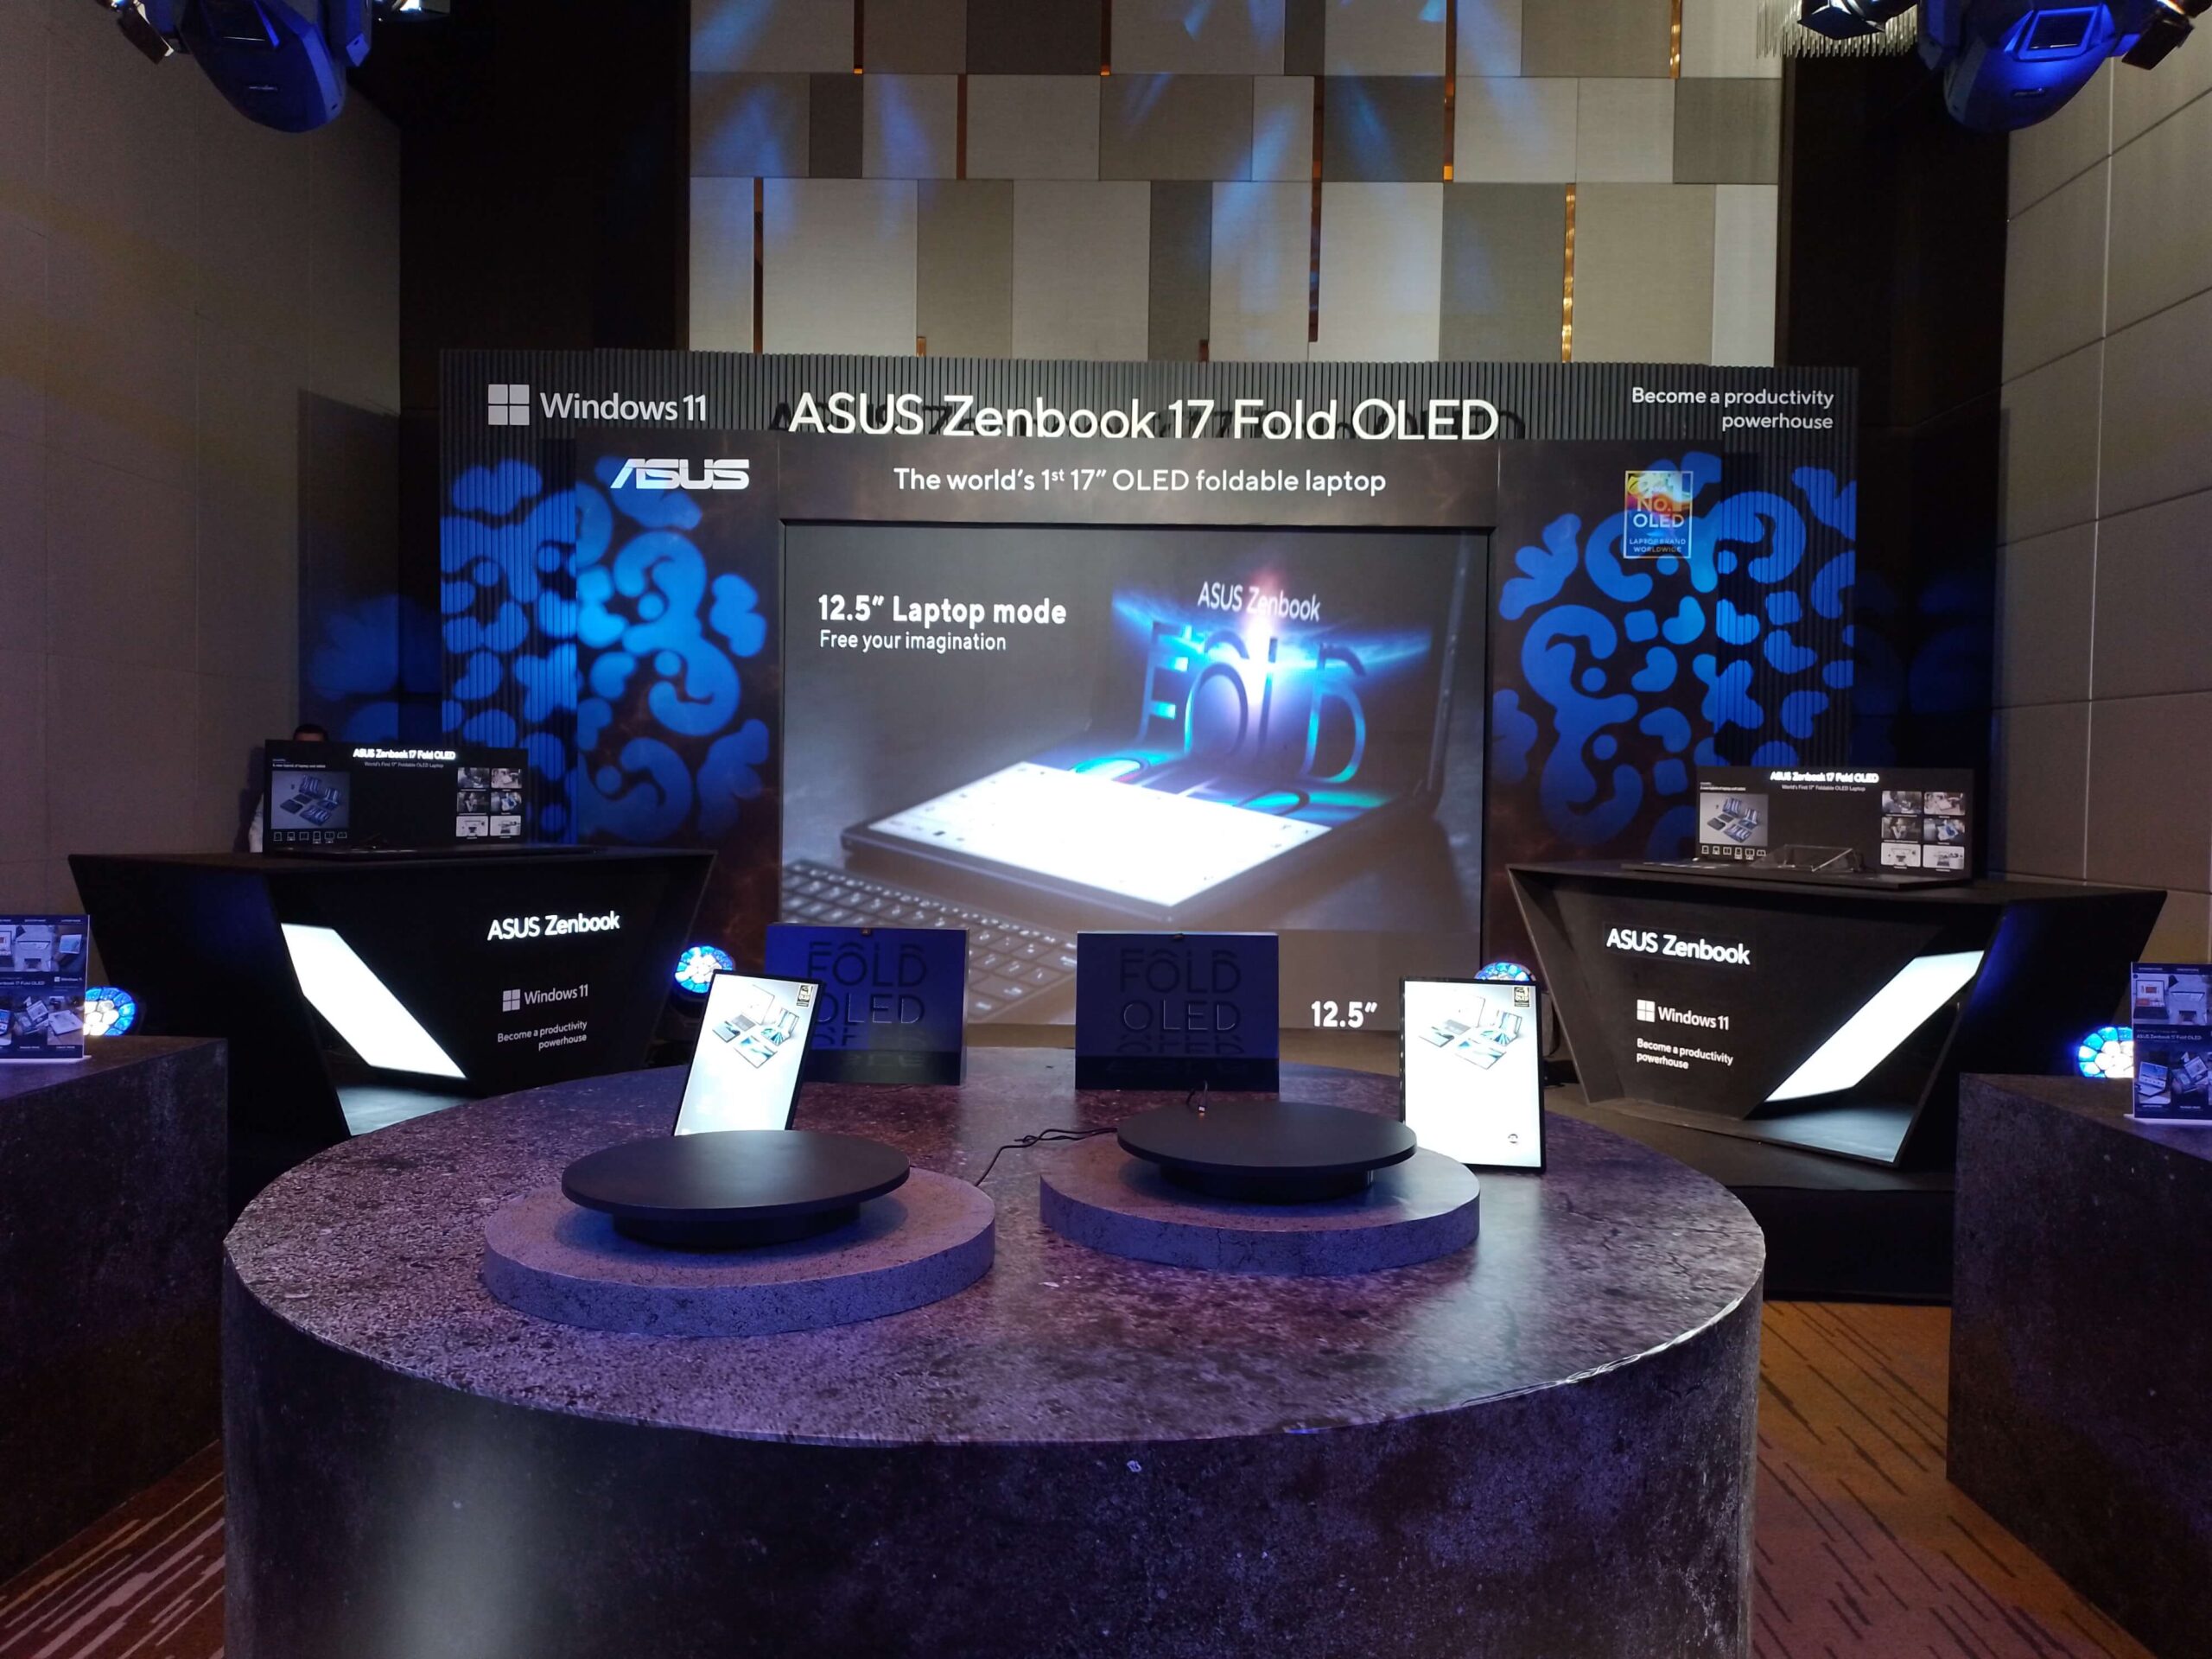 ASUS puts incredible in innovation, launches award-winning Zenbook 17 Fold OLED (2)